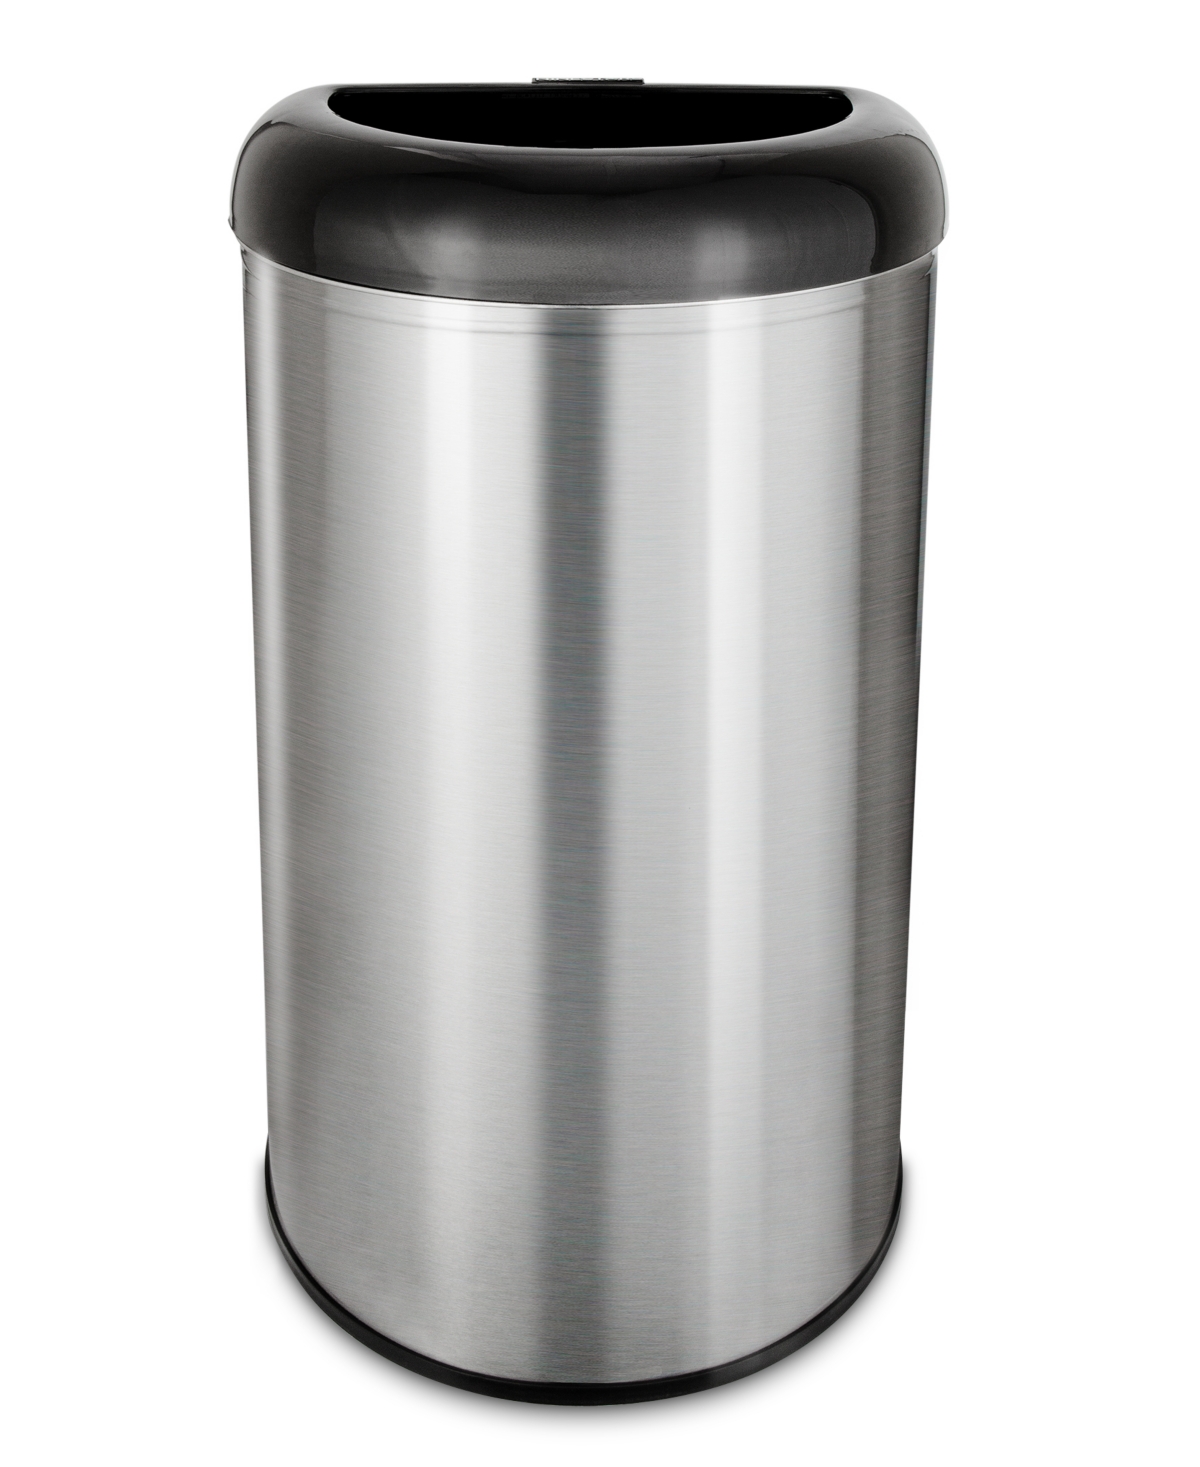 Nine Stars 13.2 Gallon Open Top Trash Can with Black Lid - Black